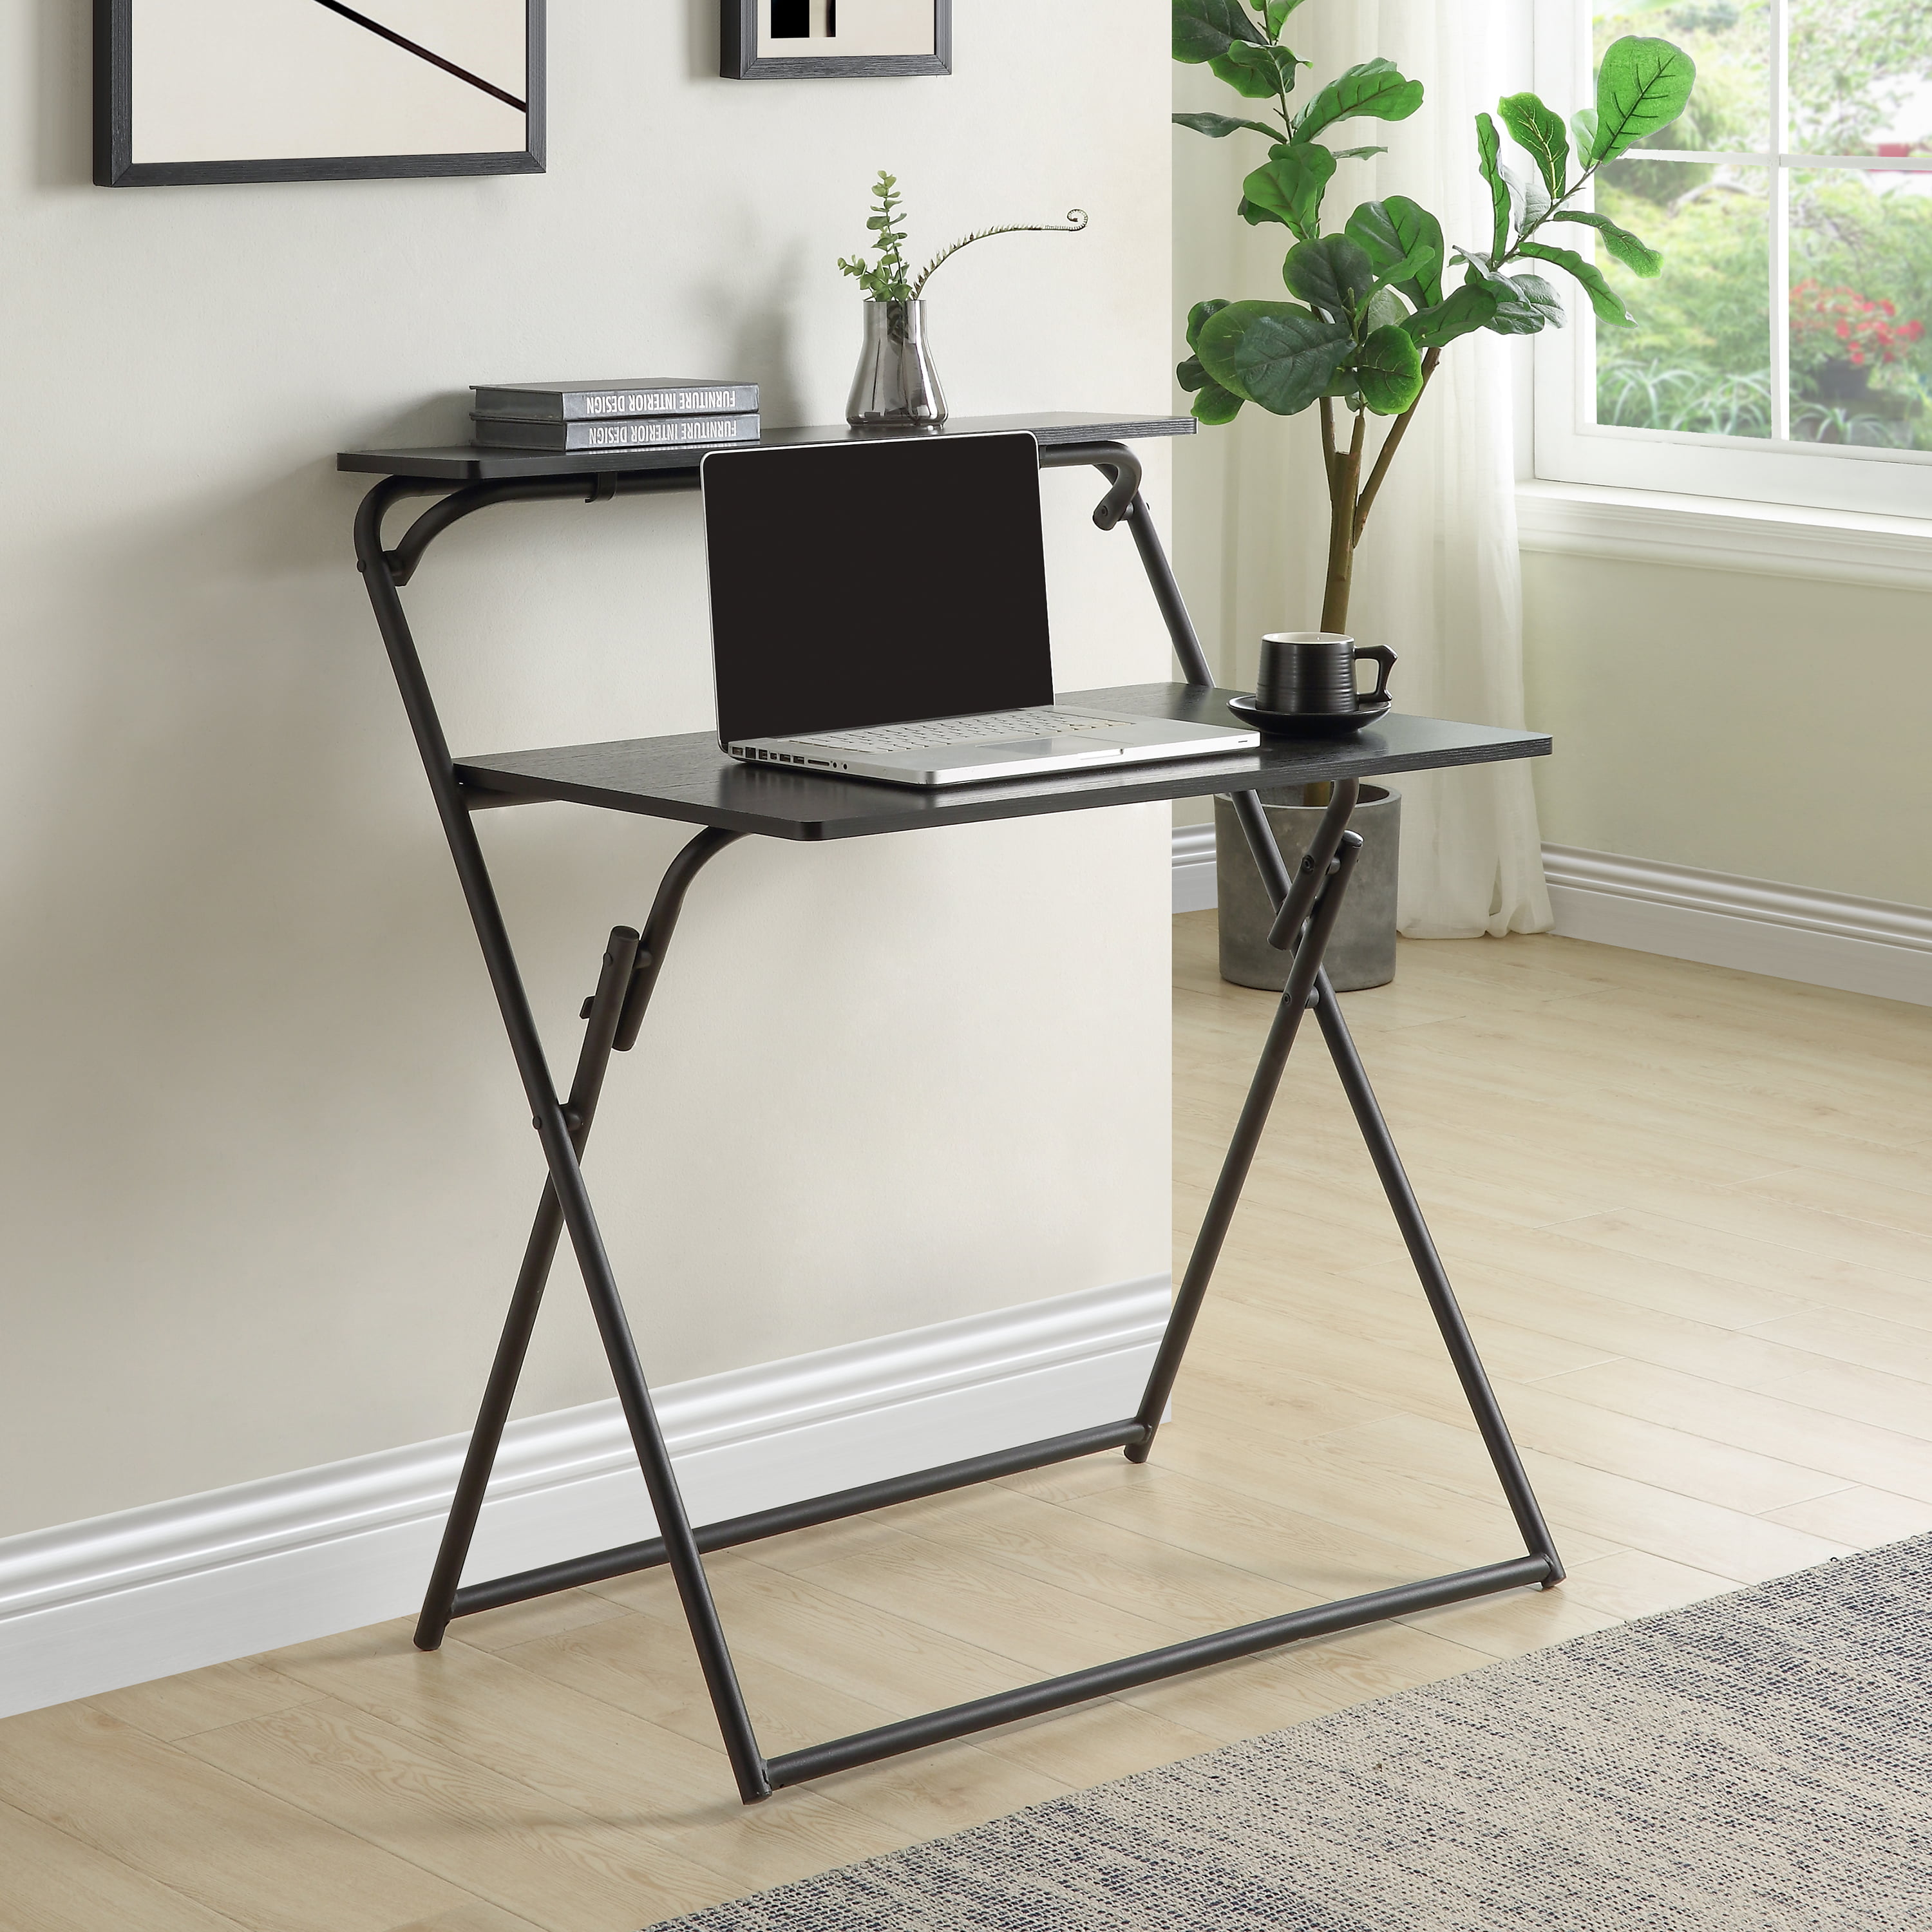 Black Details about   Small Folding Computer Desk Teens' Study Table Notebook Desk Home Office 